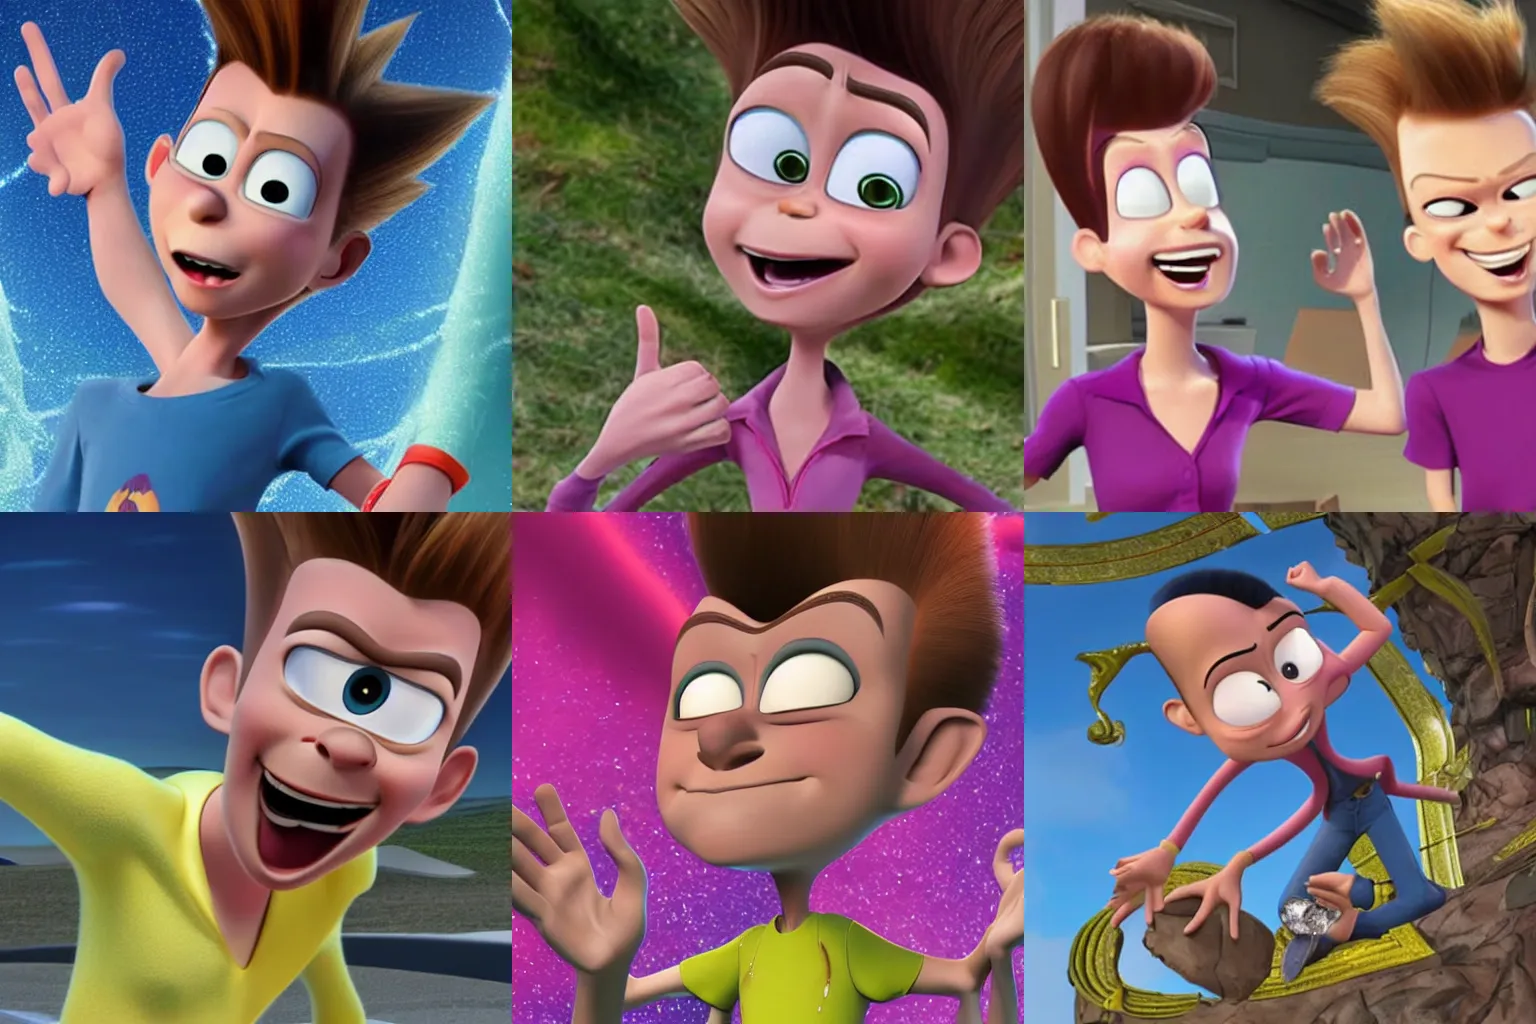 Prompt: jimmy neutron accidentally peels back layers of reality and breaks the simulation